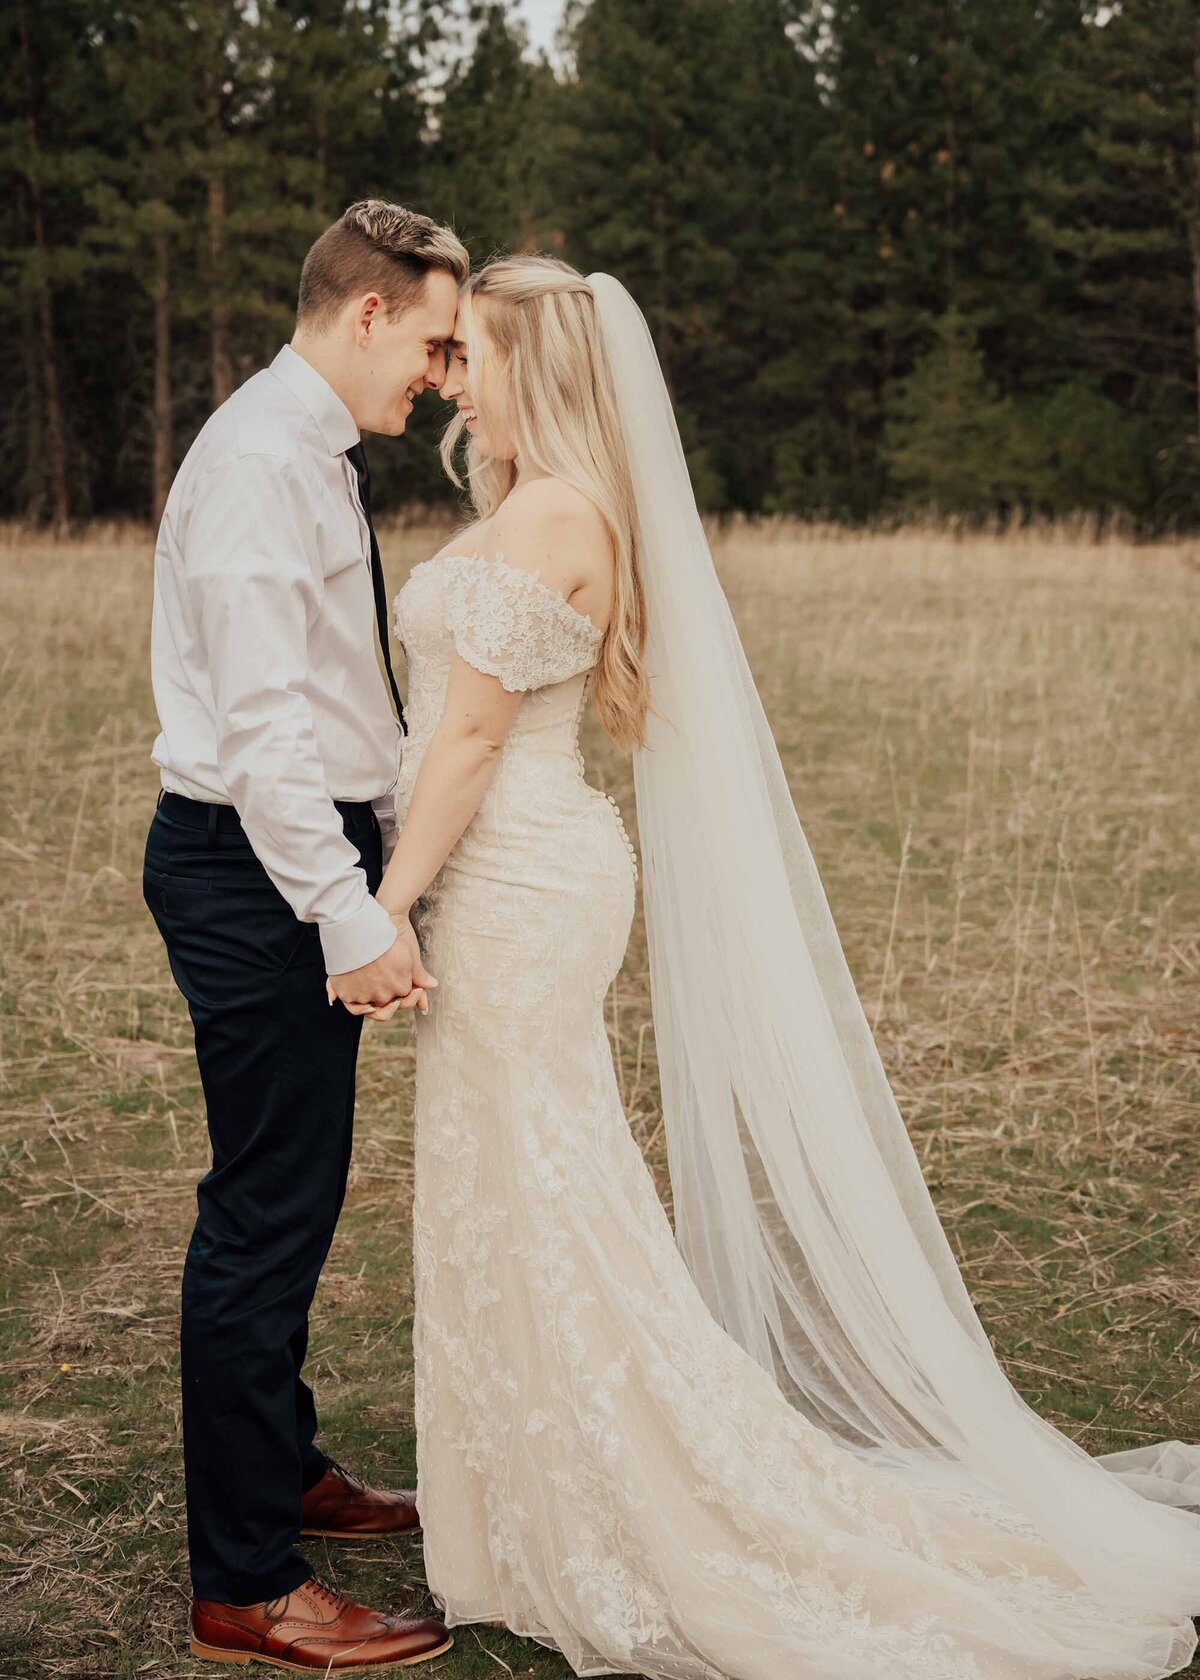 Maddie Rae Photography bride and groom standing face to face holding hands. they are touching foreheads and smiling at eachother. her dress and veil are flowing down behind her